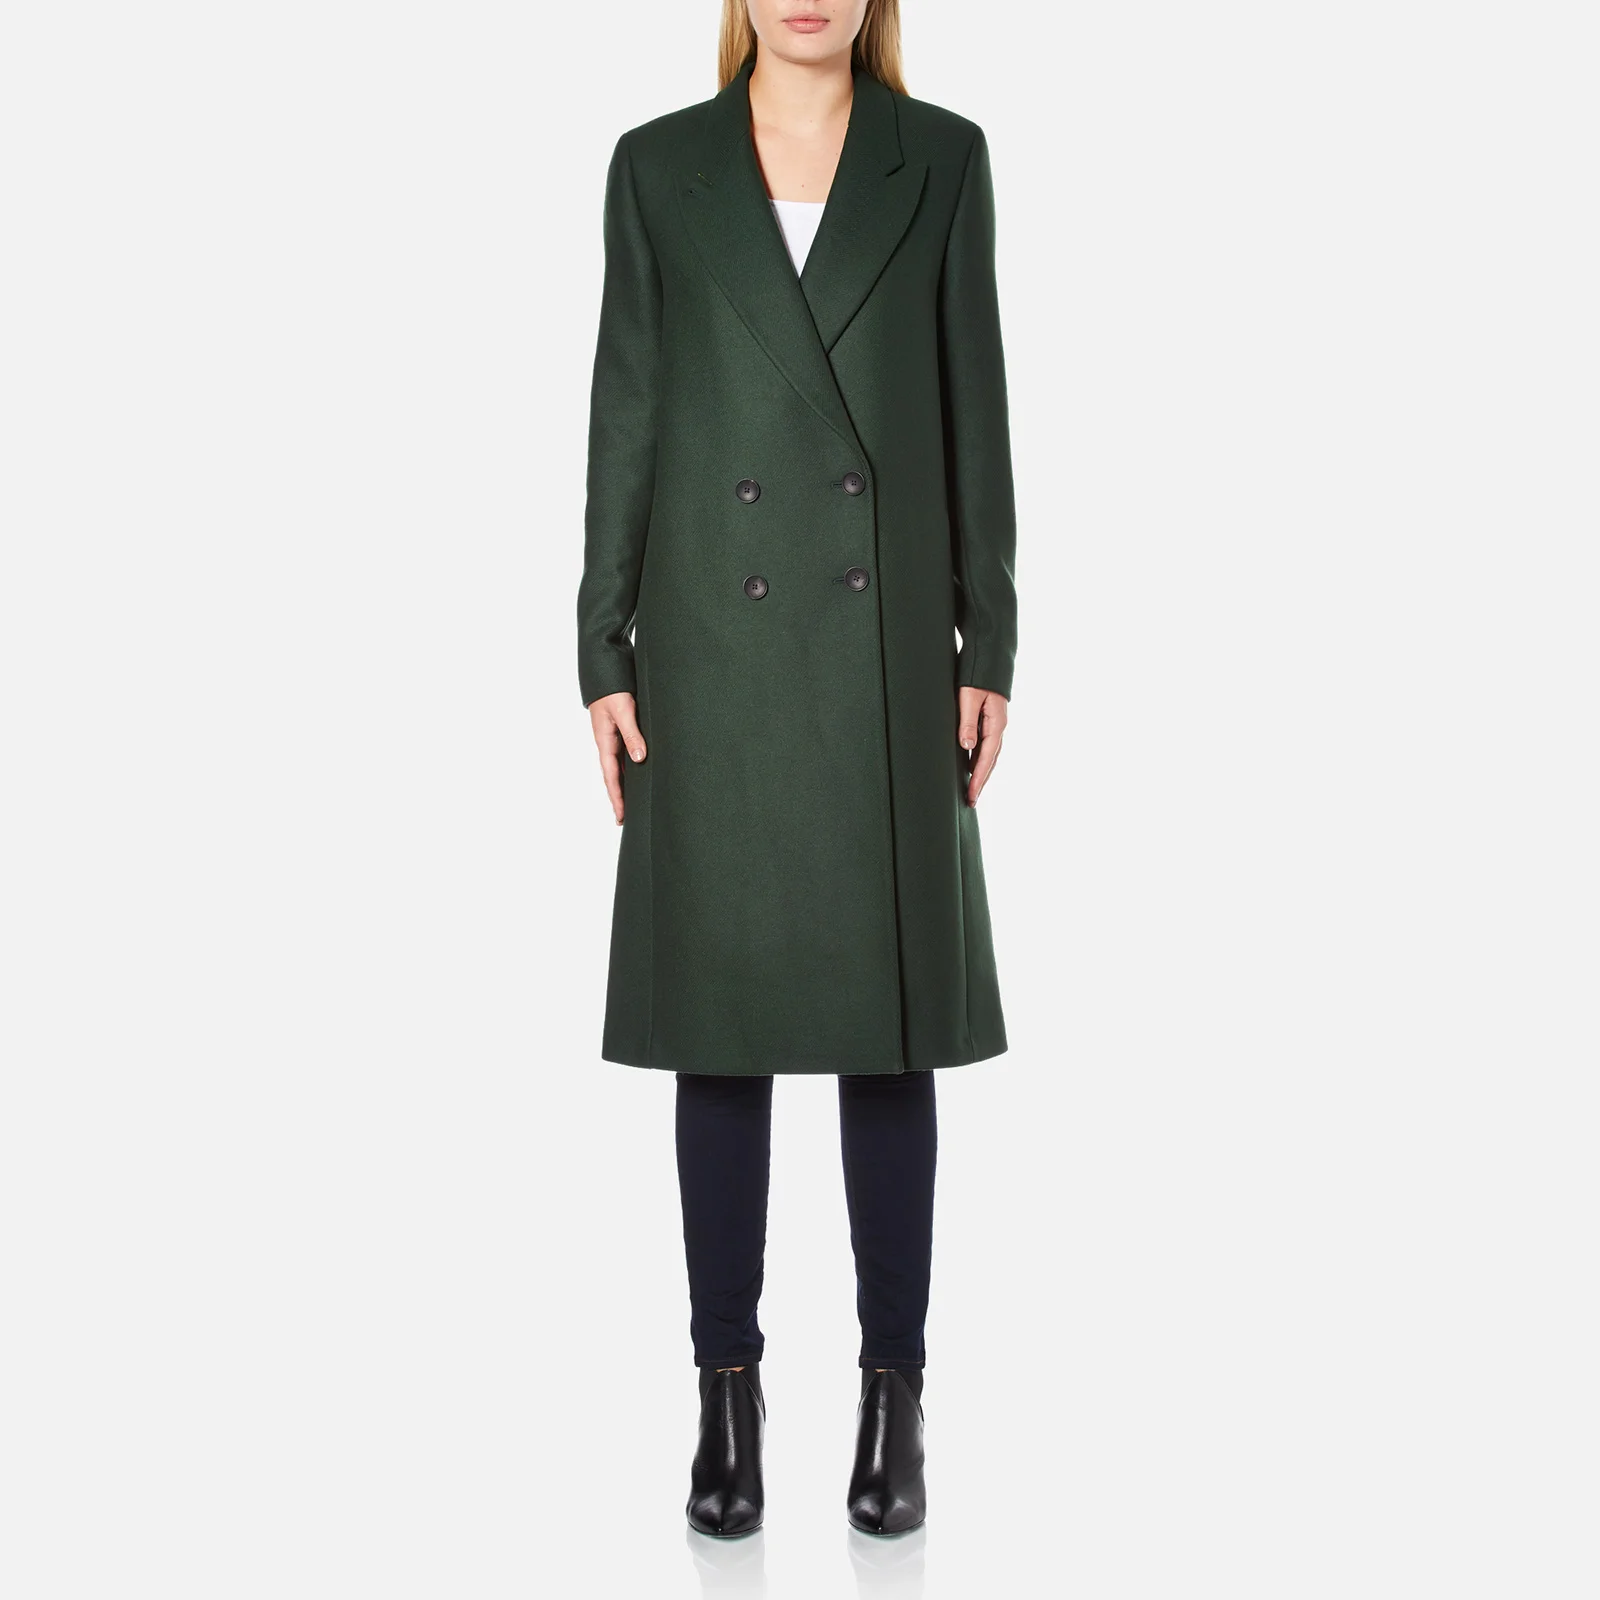 PS by Paul Smith Women's Double Breasted Wool Cashmere Coat - Green Image 1